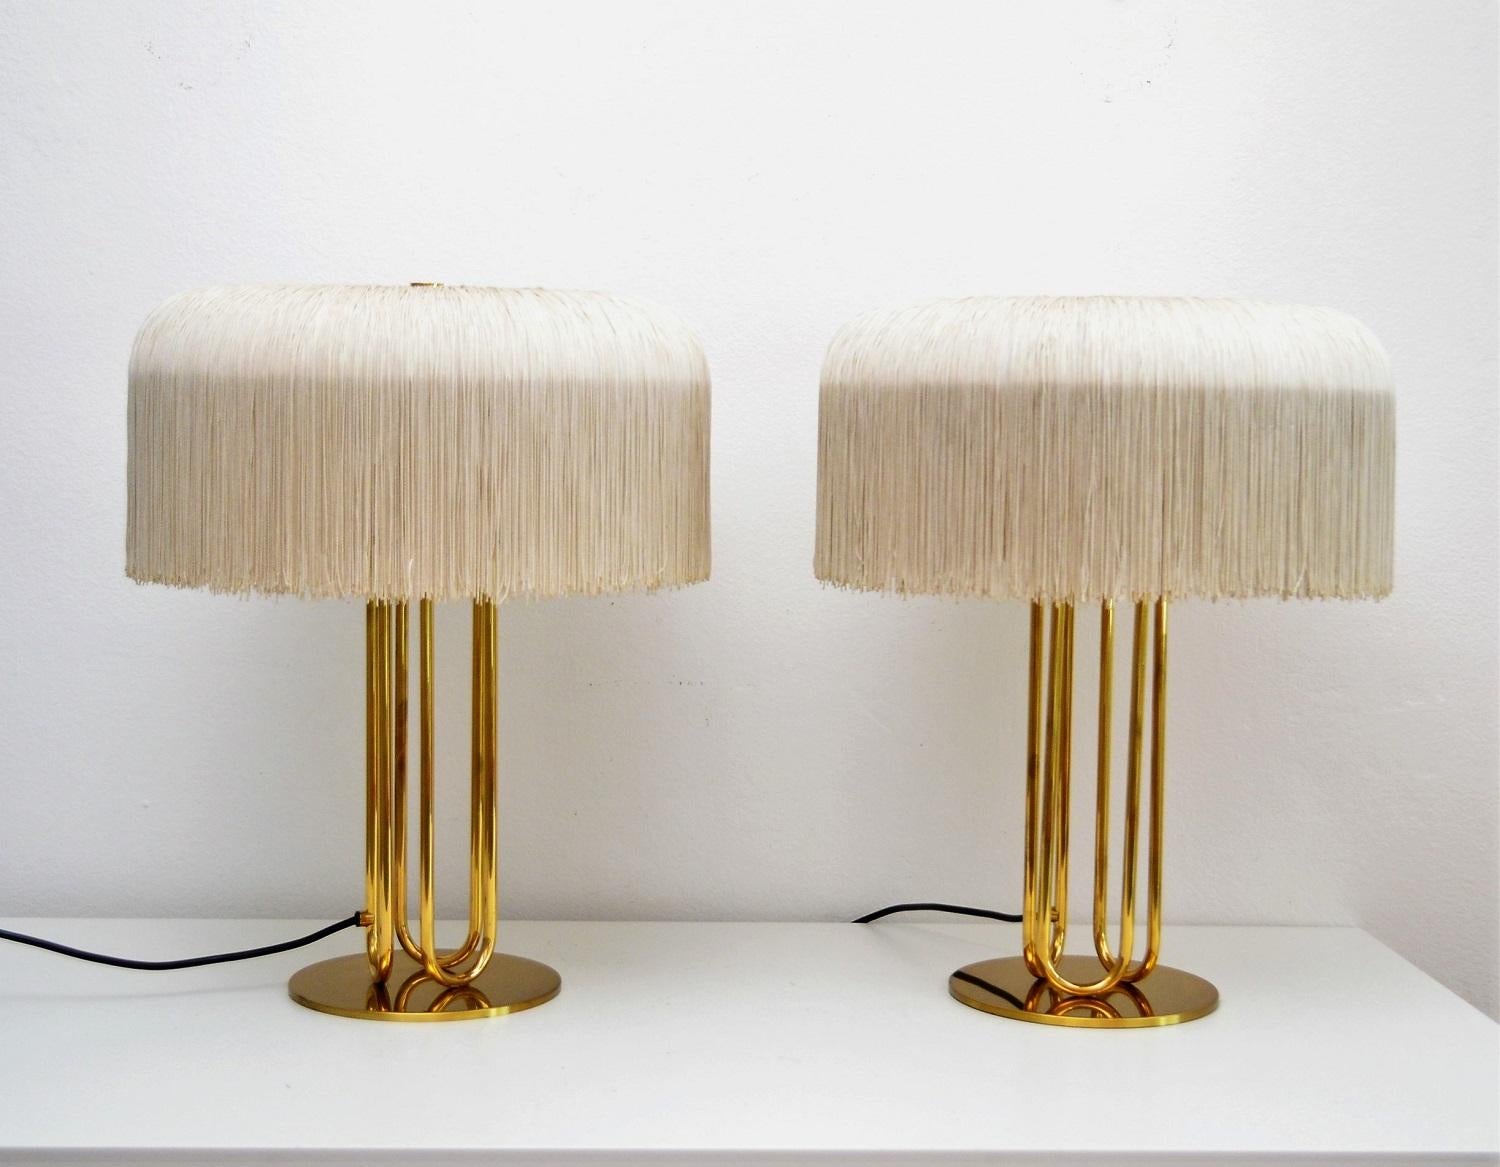 Magnificent elegant pair of big table lamps designed by Swedish Hans-Agne Jakobsson and manufactured during the 1960s.
The lamps bases are made of full heavy brass, whose golden color has taken a gorgeous dark patina.
The round lampshades are